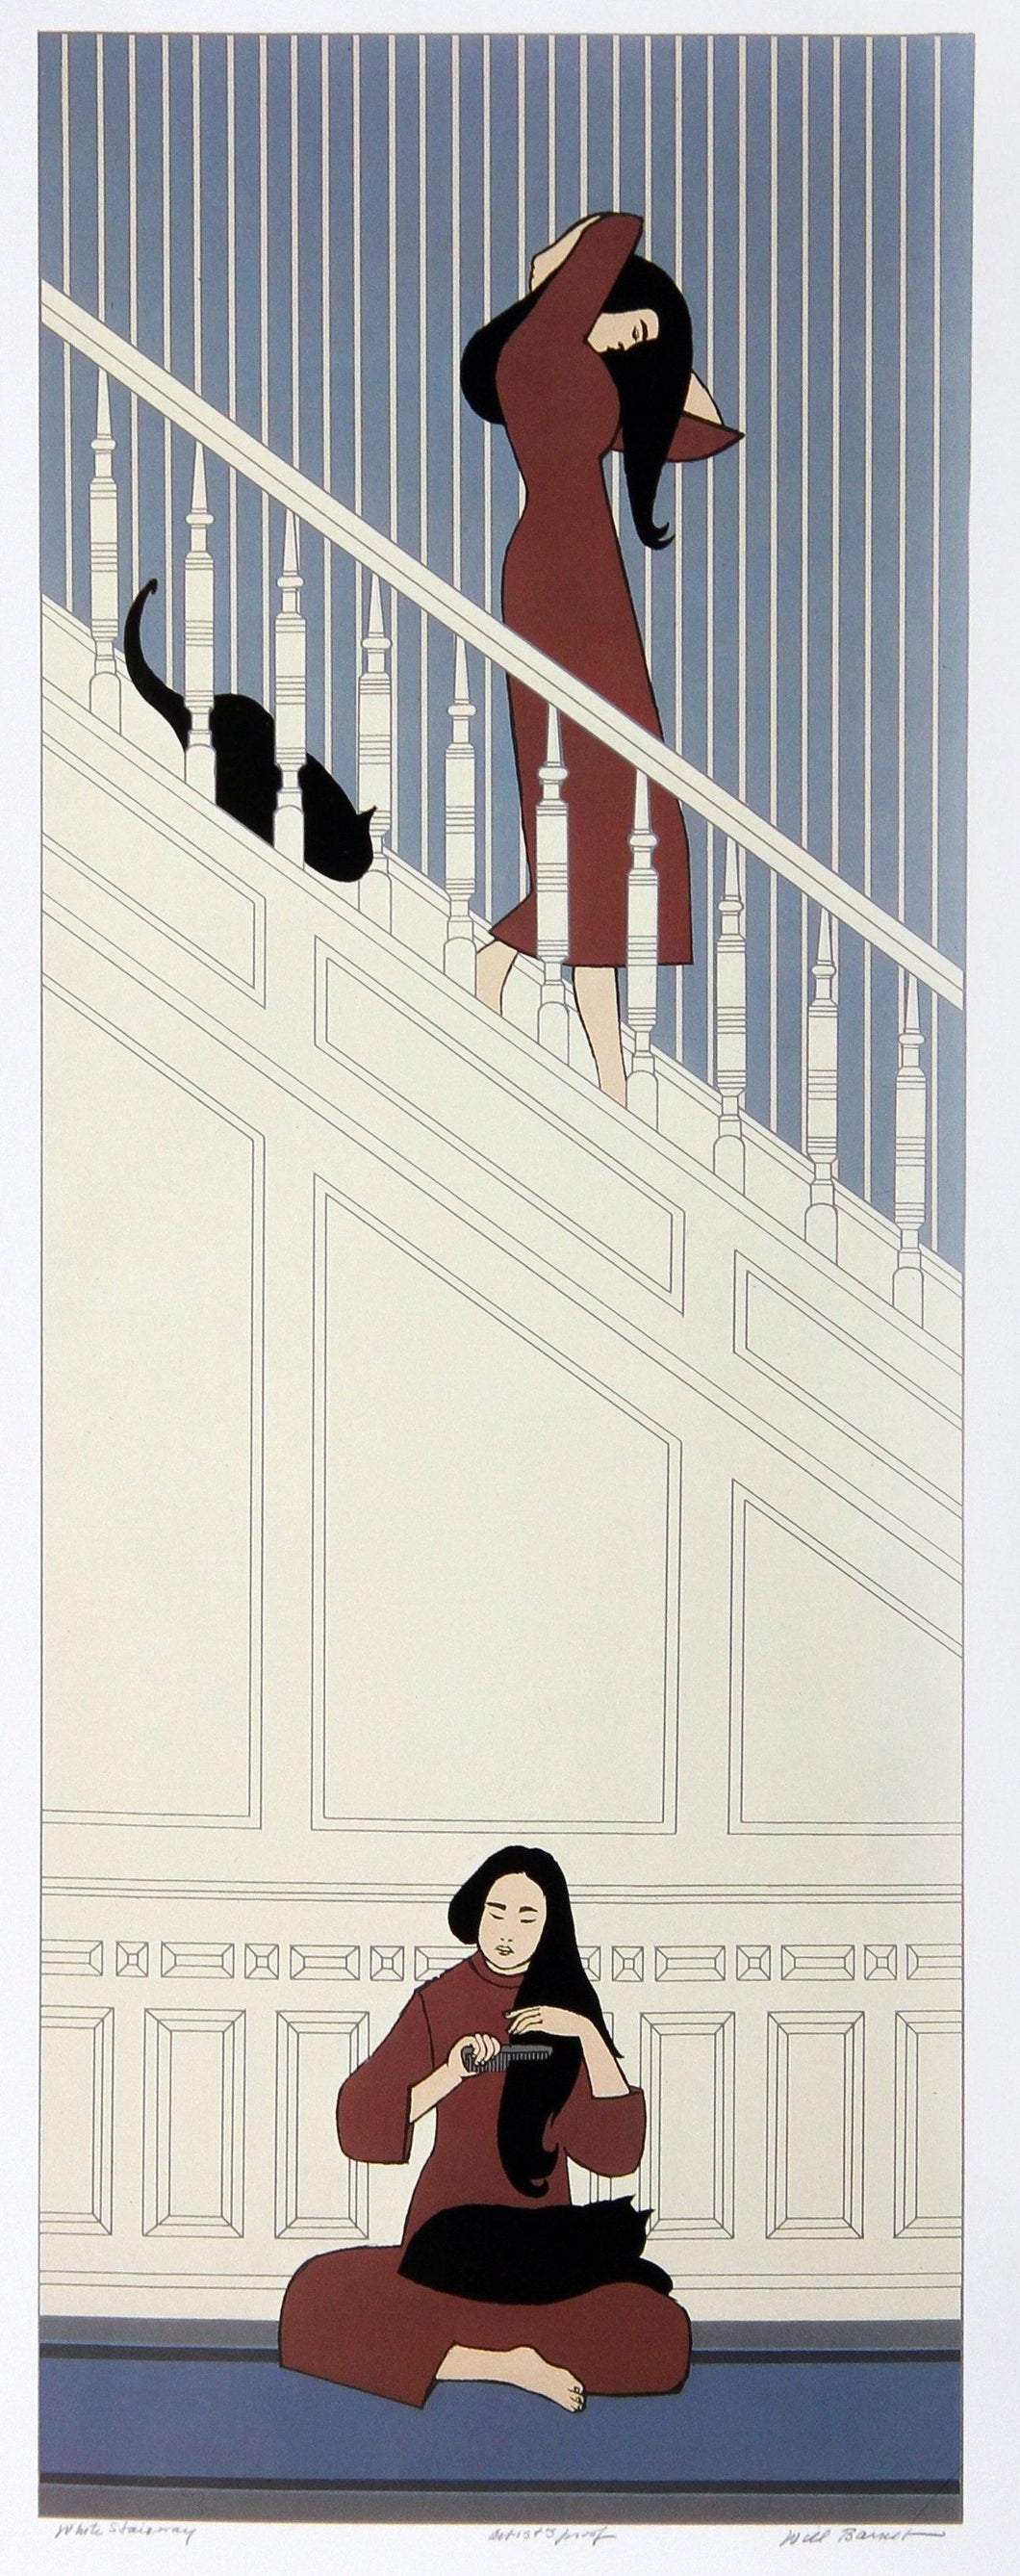 White Stairway Poster | Will Barnet,{{product.type}}